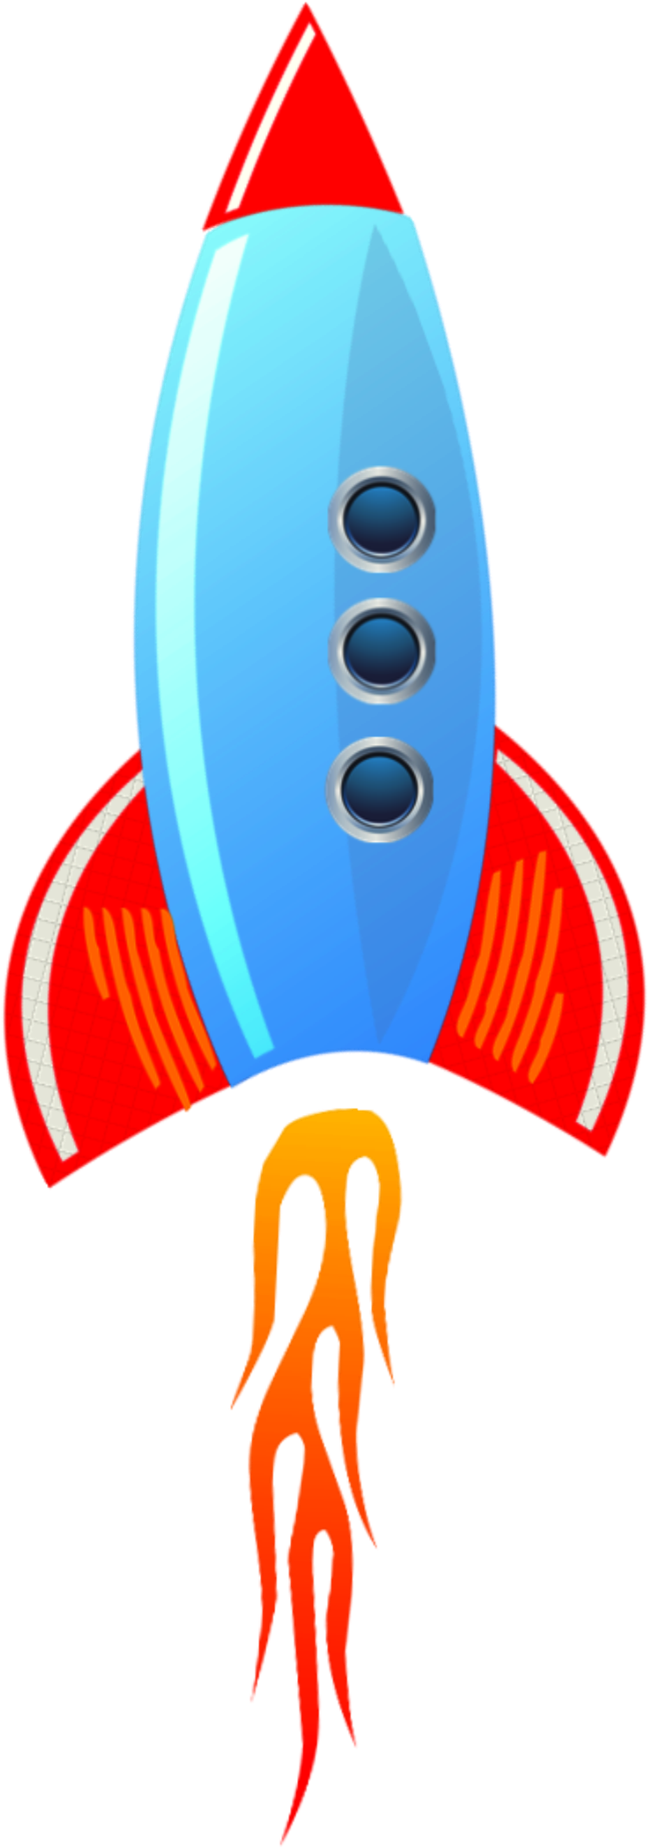 A Blue And Red Rocket With Three Circles And A Red And Orange Object